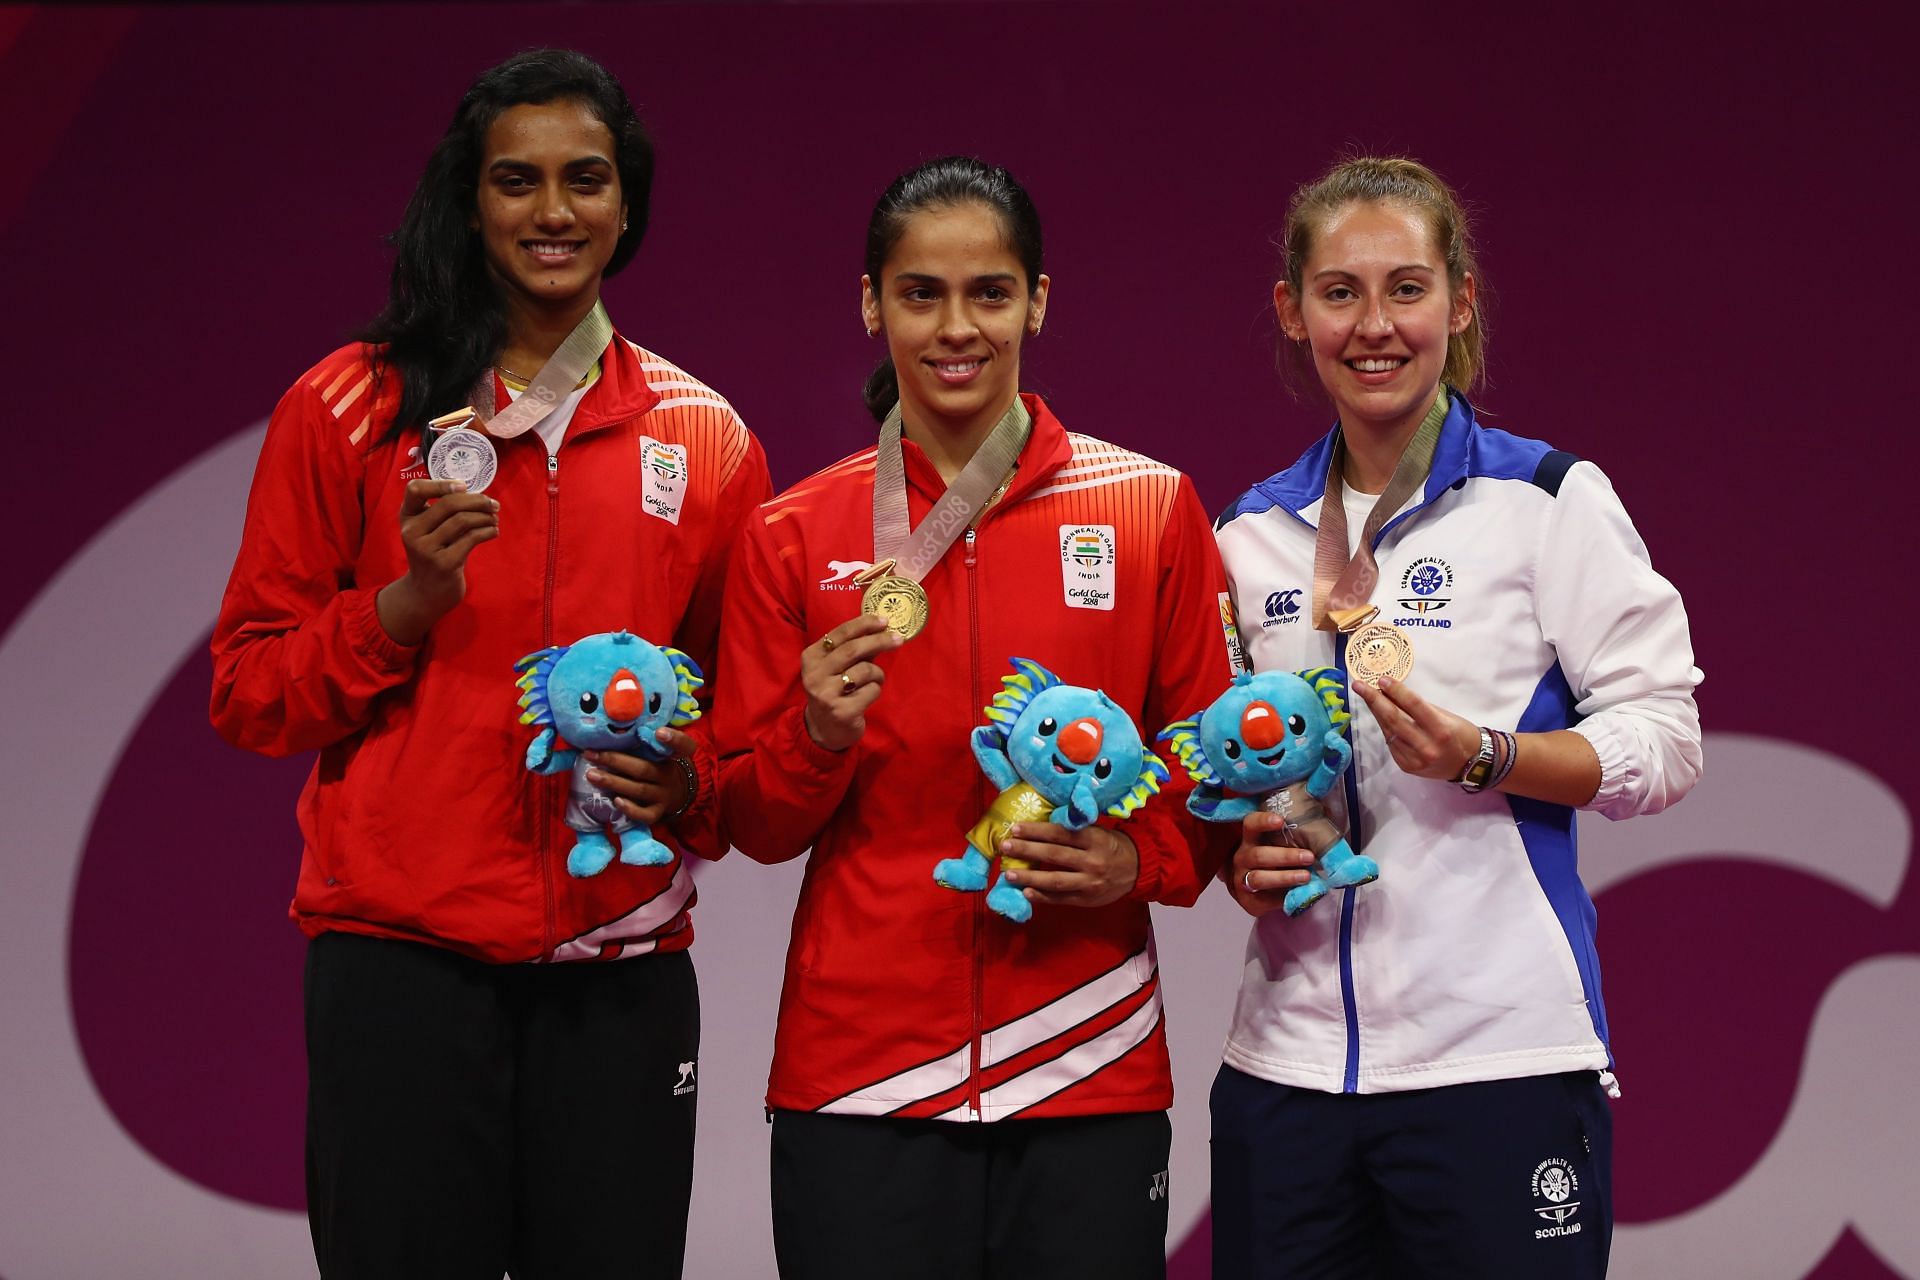 Gold medalist Saina Nehwal (C) poses with silver medalist PV Sindhu (L) and bronze medalist Kirsty Gilmour at the 2018 Commonwealth Games.